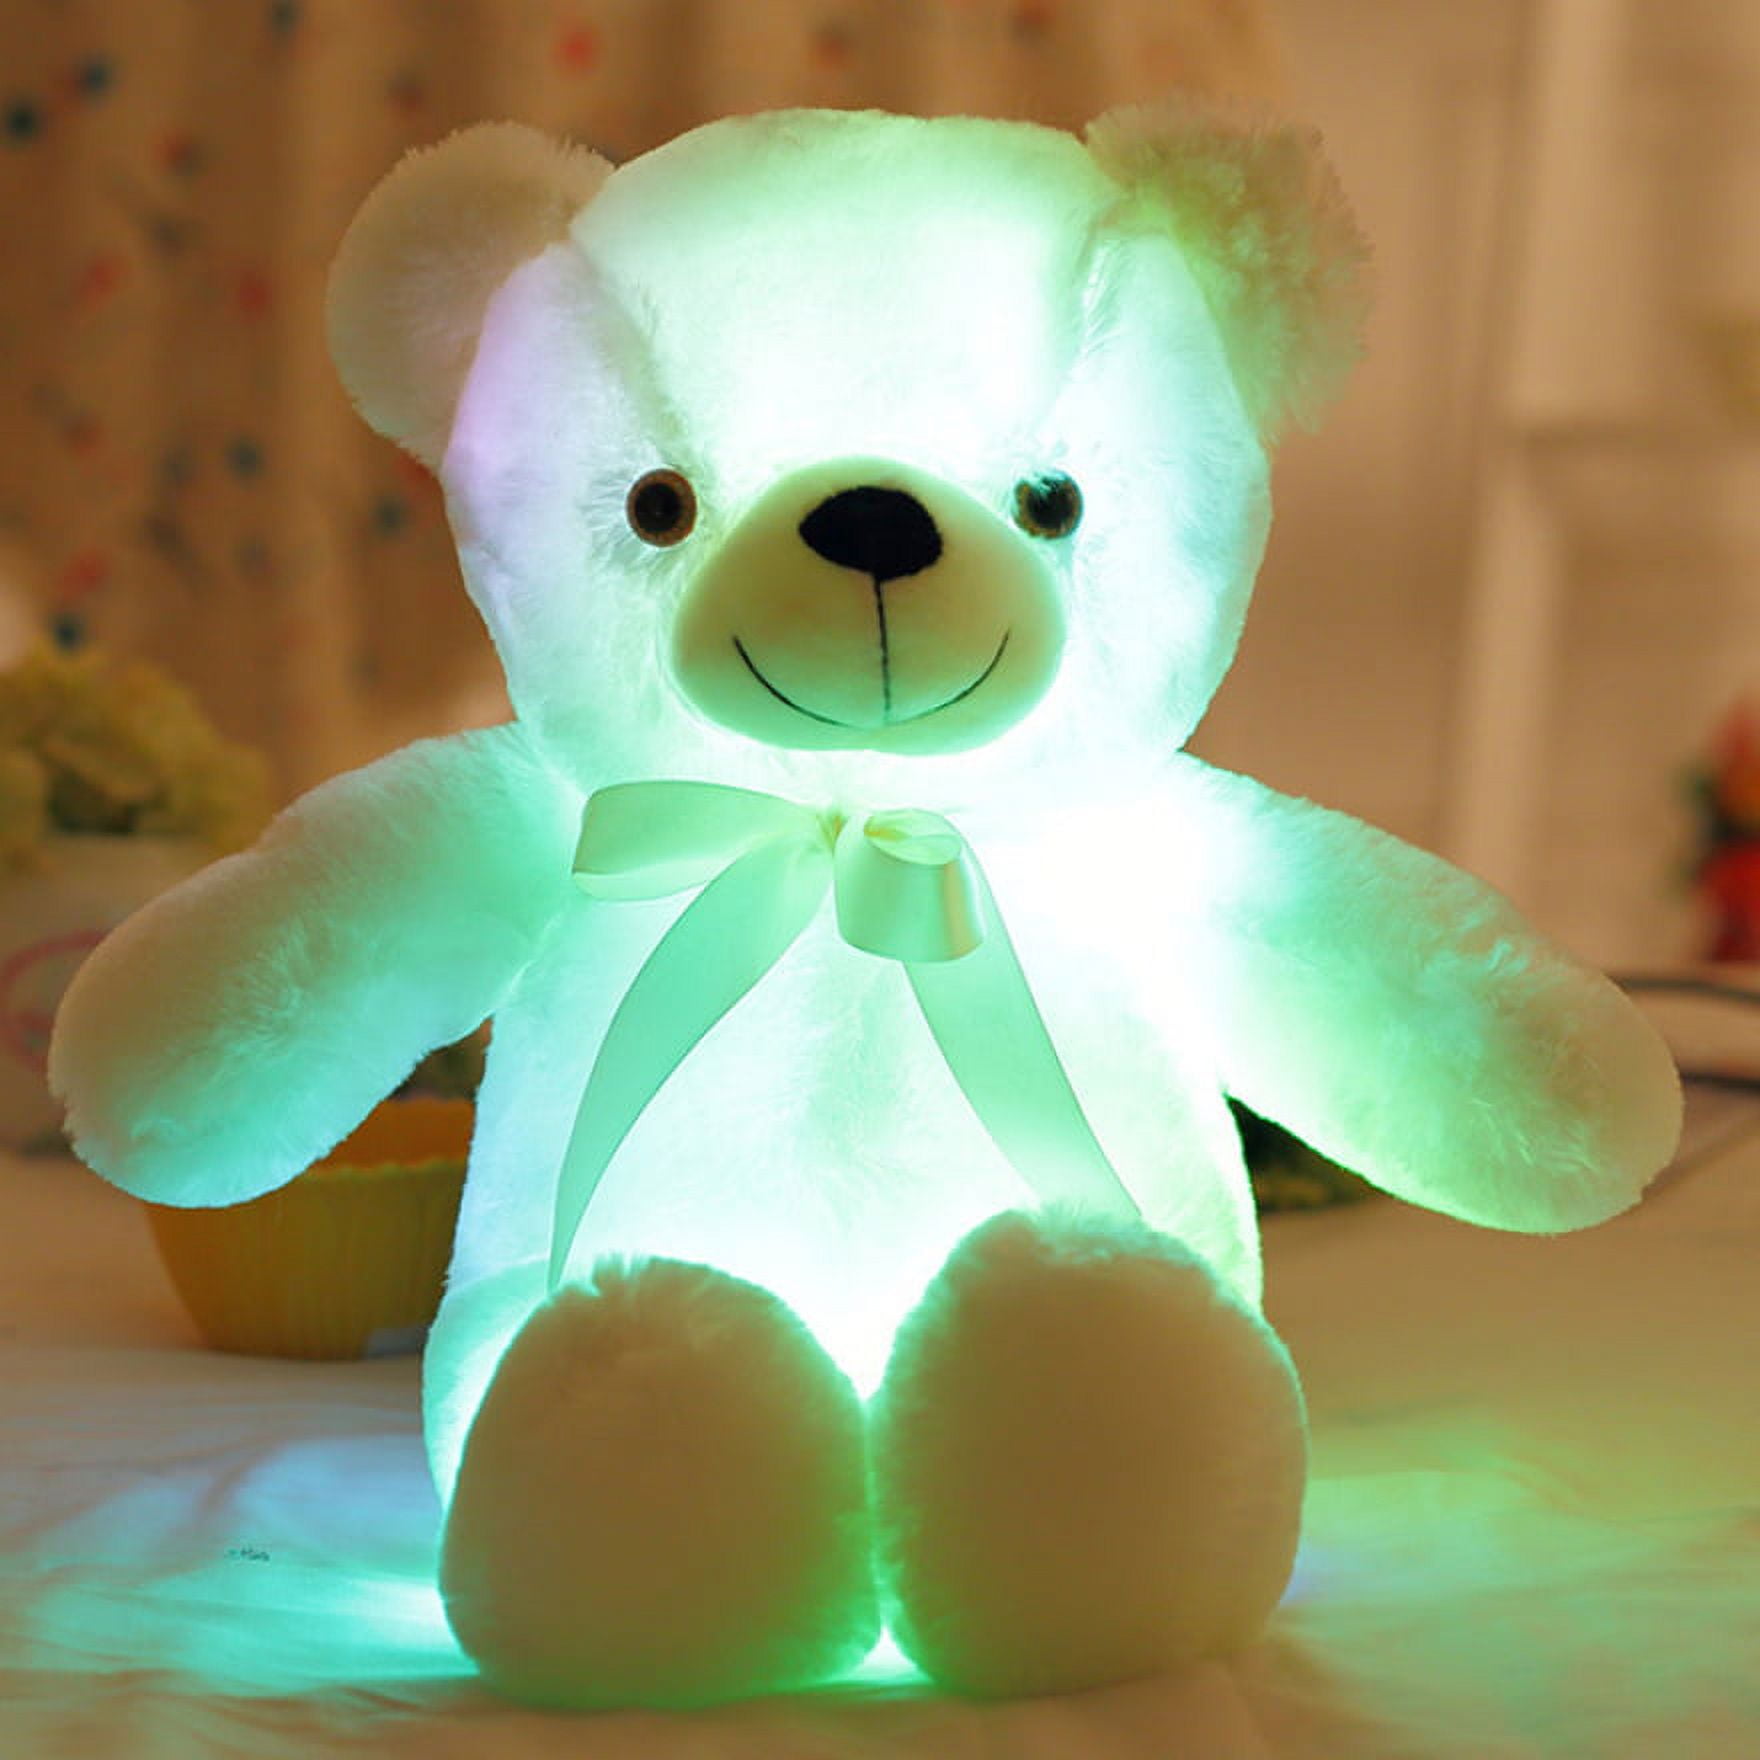 Jzenzero Glow Teddy Bear with Bow-tie Creatives Stuffed Animal Soft LED  Light Up Plush Toy For Adults Kids New